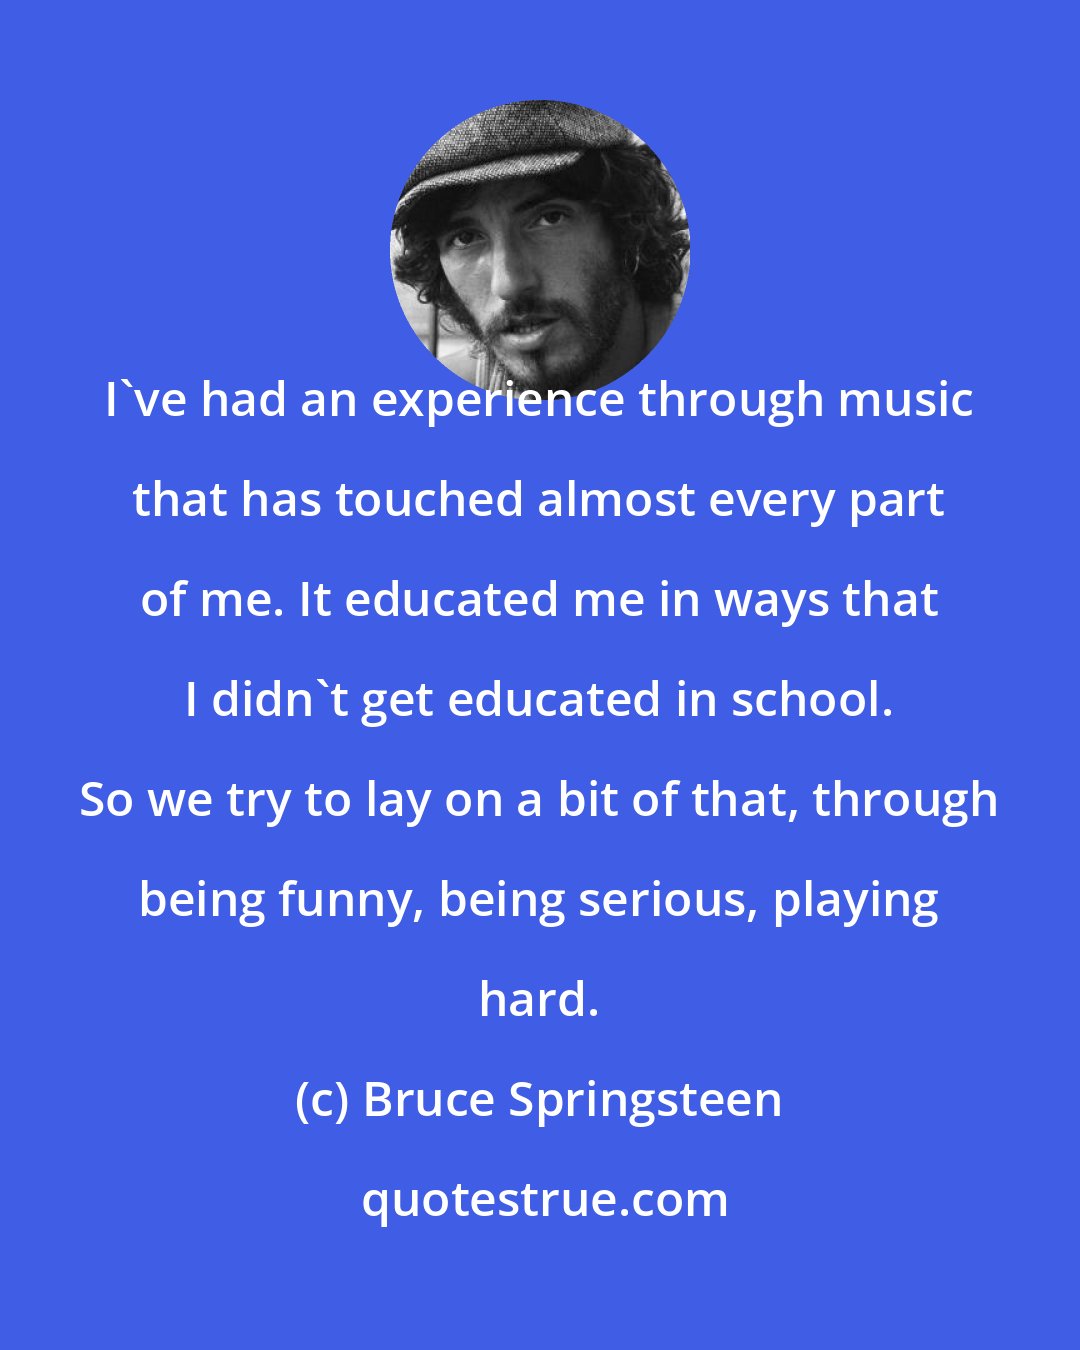 Bruce Springsteen: I've had an experience through music that has touched almost every part of me. It educated me in ways that I didn't get educated in school. So we try to lay on a bit of that, through being funny, being serious, playing hard.